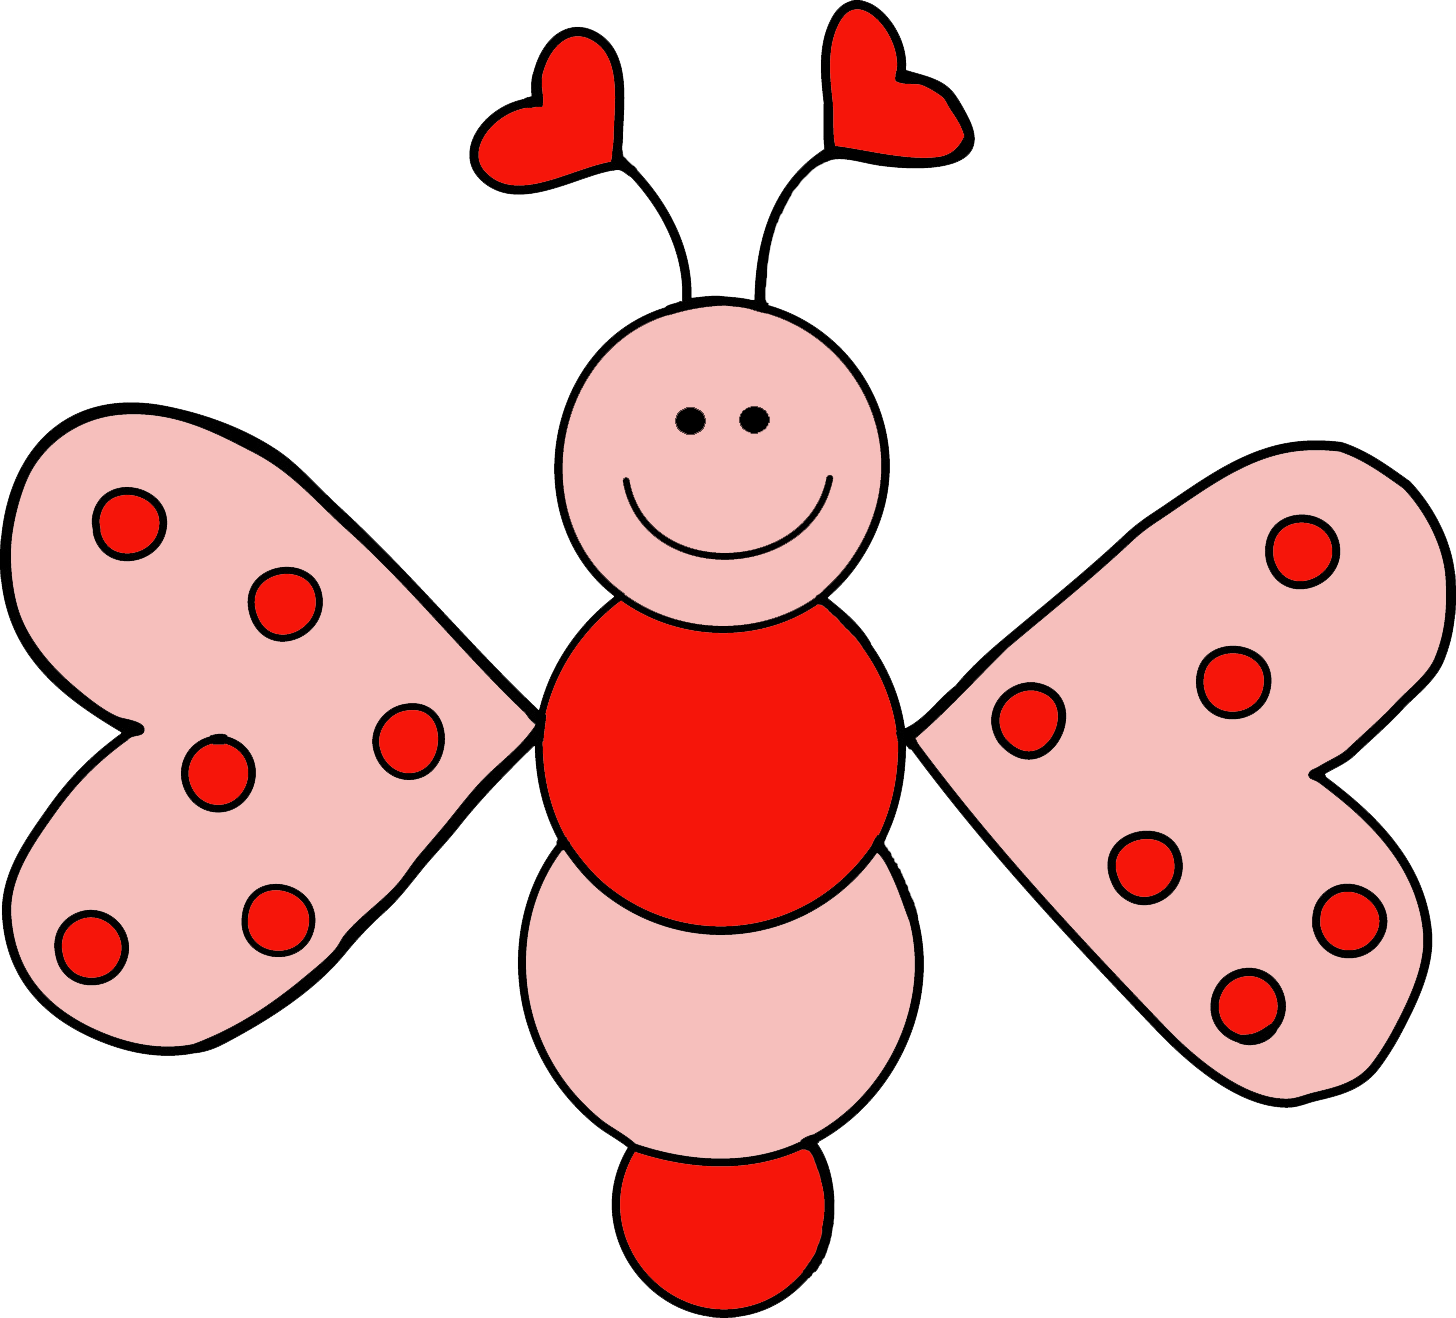 Bugs Clipart | Free download best Bugs Clipart on ClipArtMag.com1456 x 1318